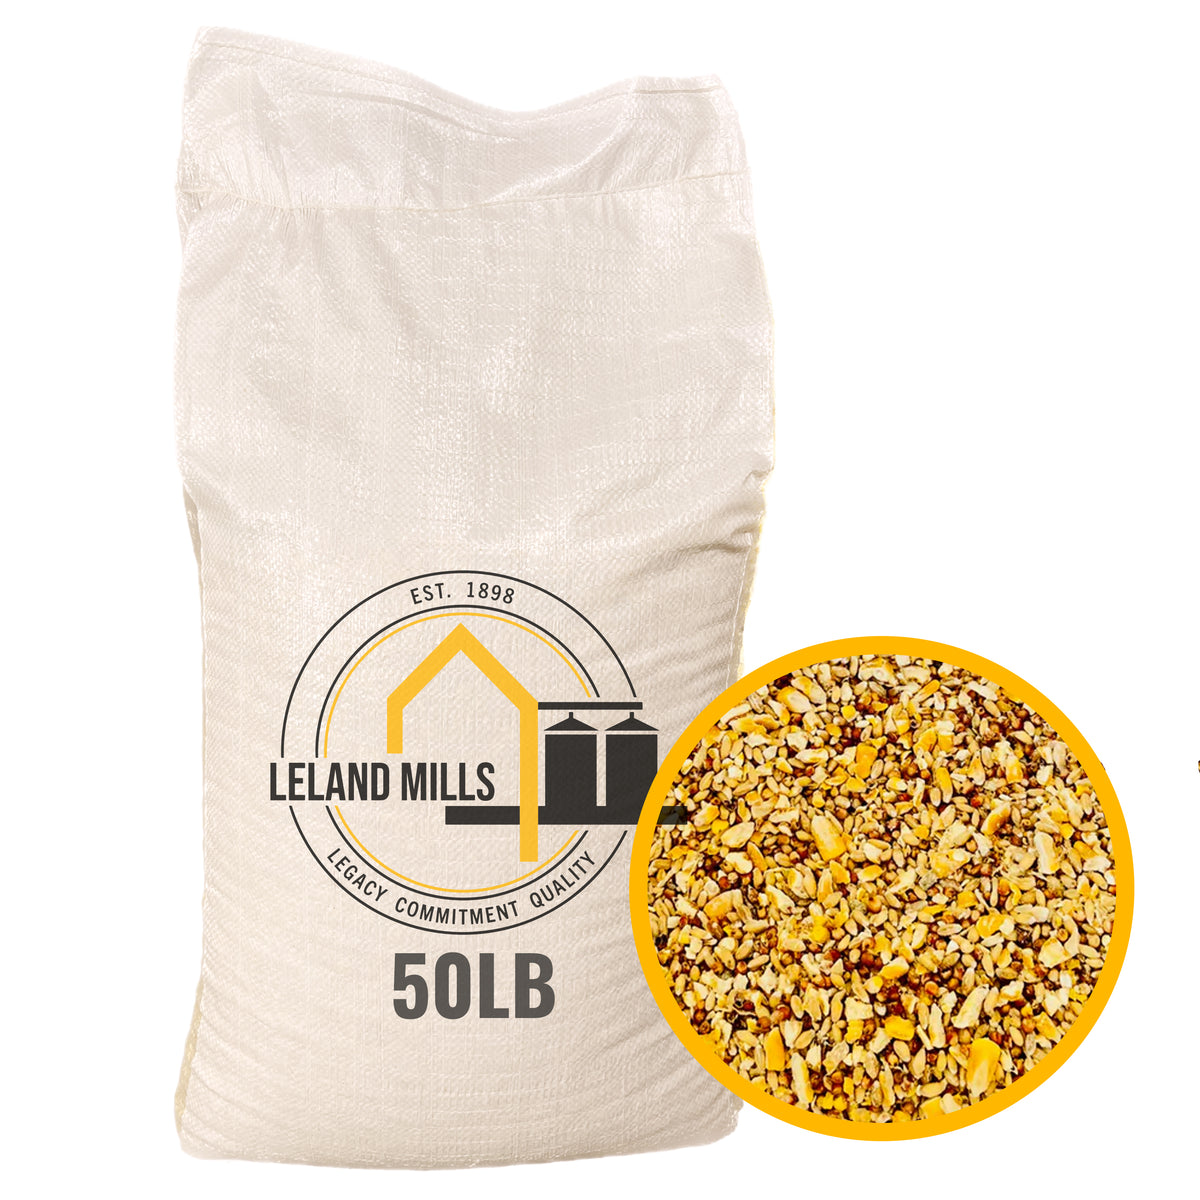 50lb bag of Chicken Scratch Feed by Leland Mills